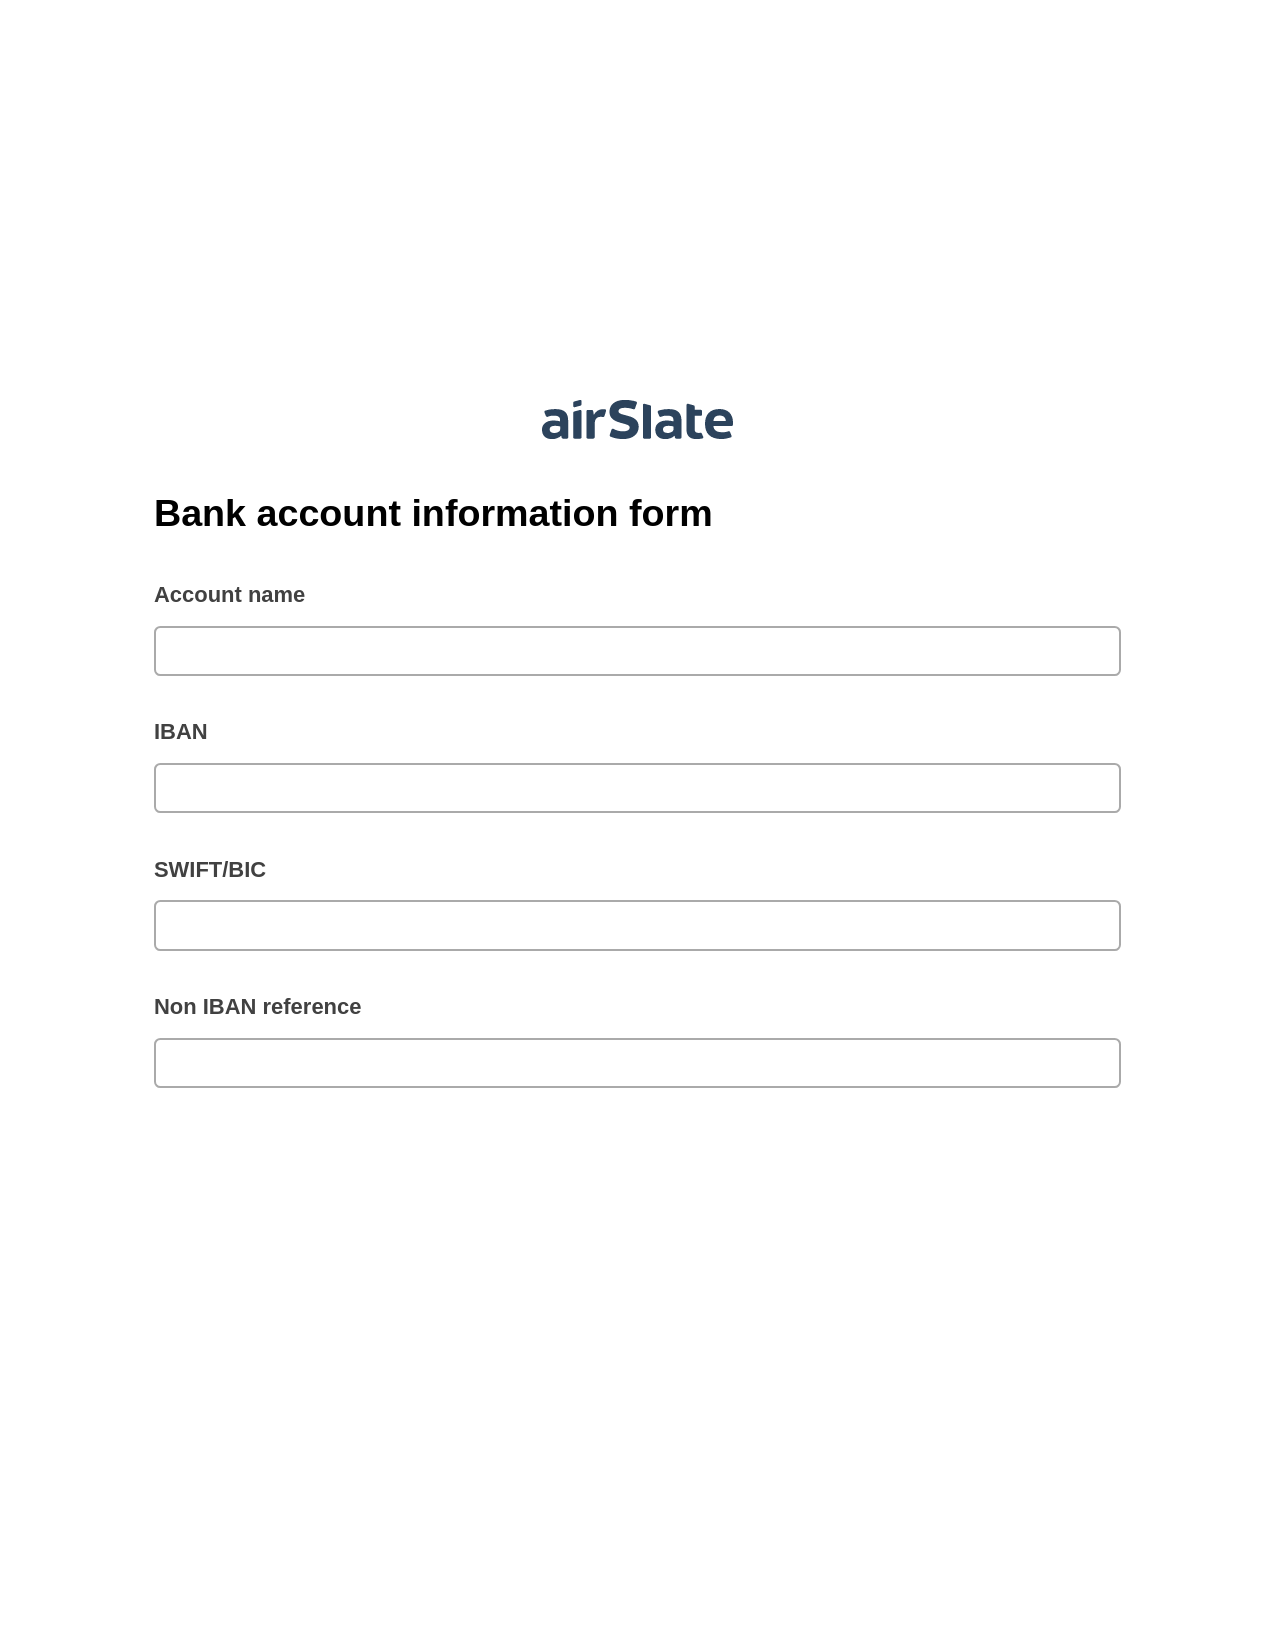 Bank account information form Pre-fill from CSV File Dropdown Options Bot, Mailchimp add recipient to audience Bot, Export to Google Sheet Bot